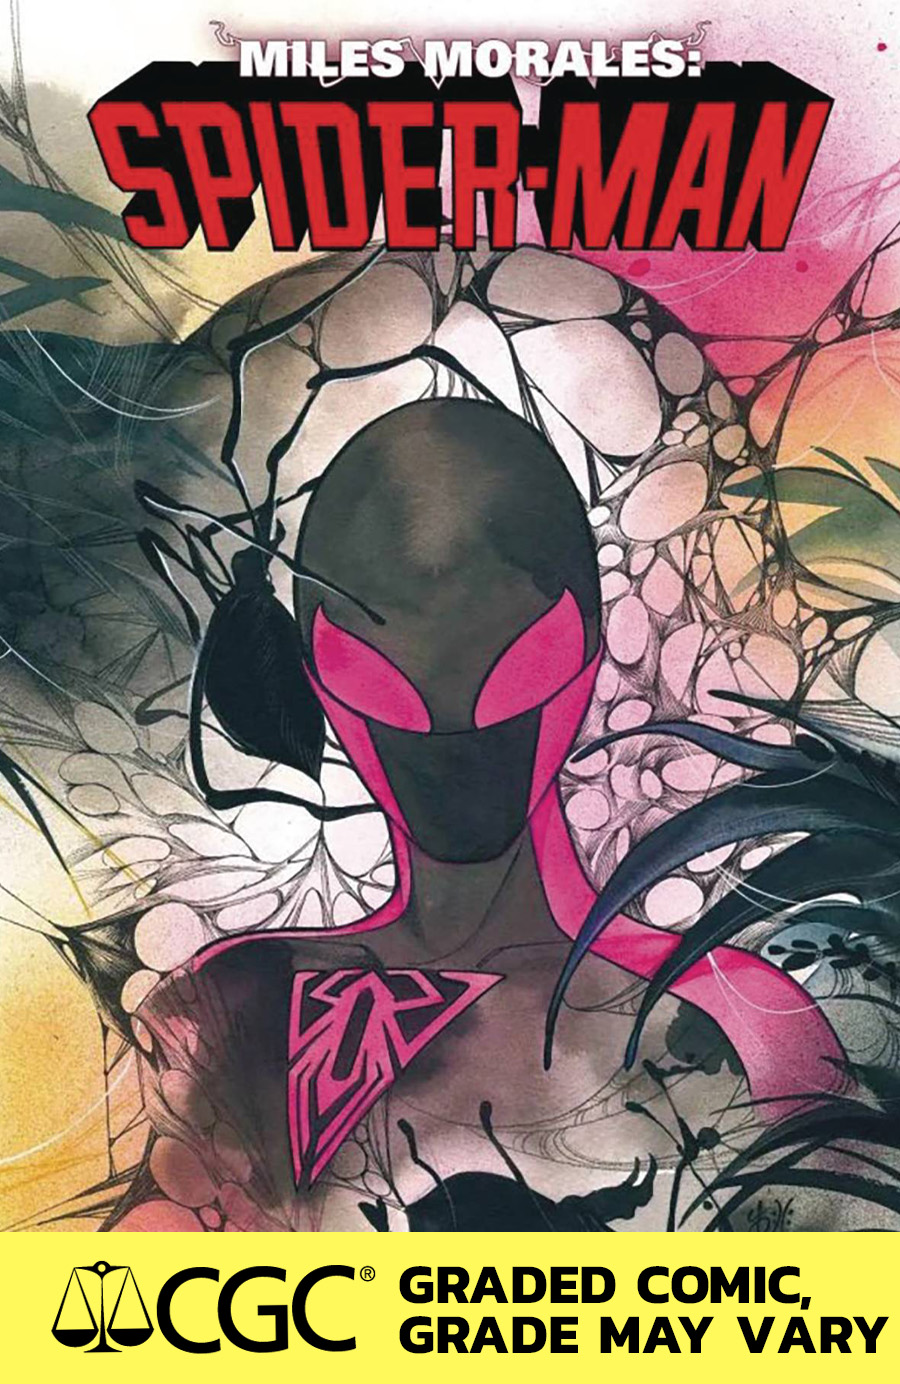 Miles Morales Spider-Man Vol 2 #1 Cover N DF Peach Momoko Costume A Variant Cover CGC Graded